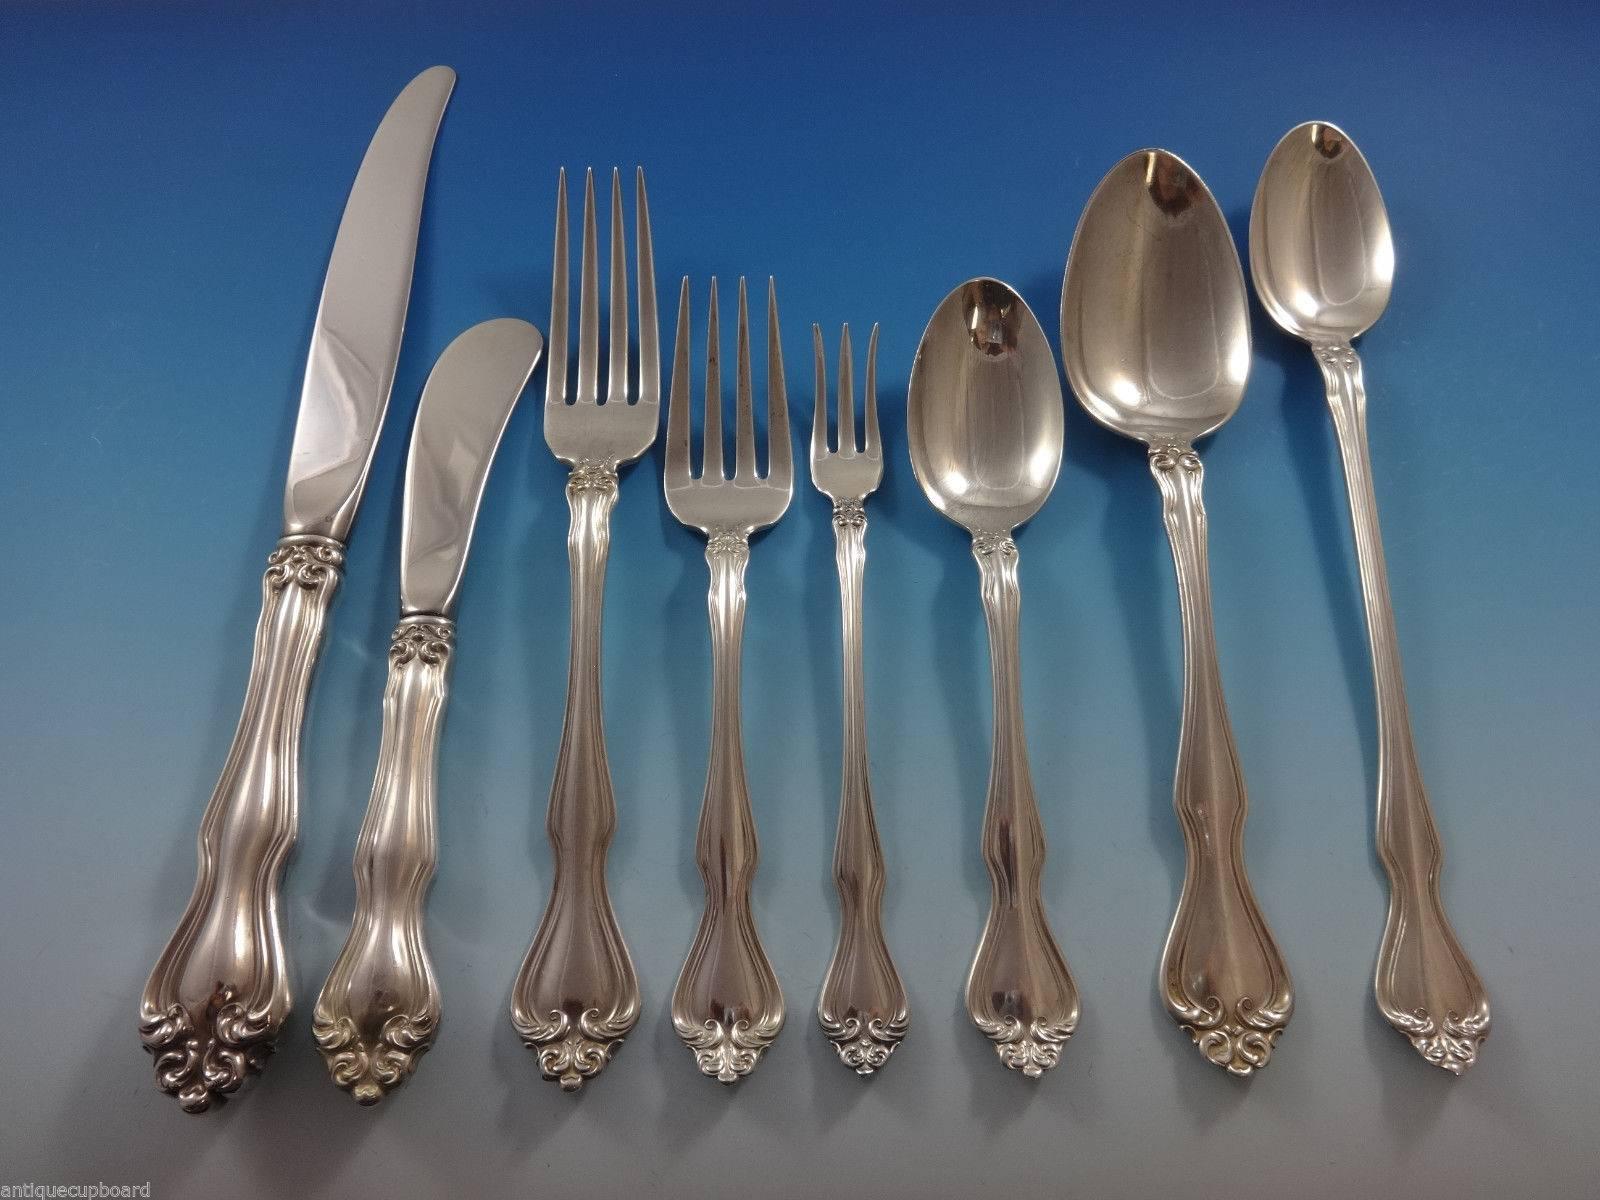 Monumental George & Martha by Westmorland sterling silver flatware set of 154 pieces. This set includes:

18 knives, 9 1/8